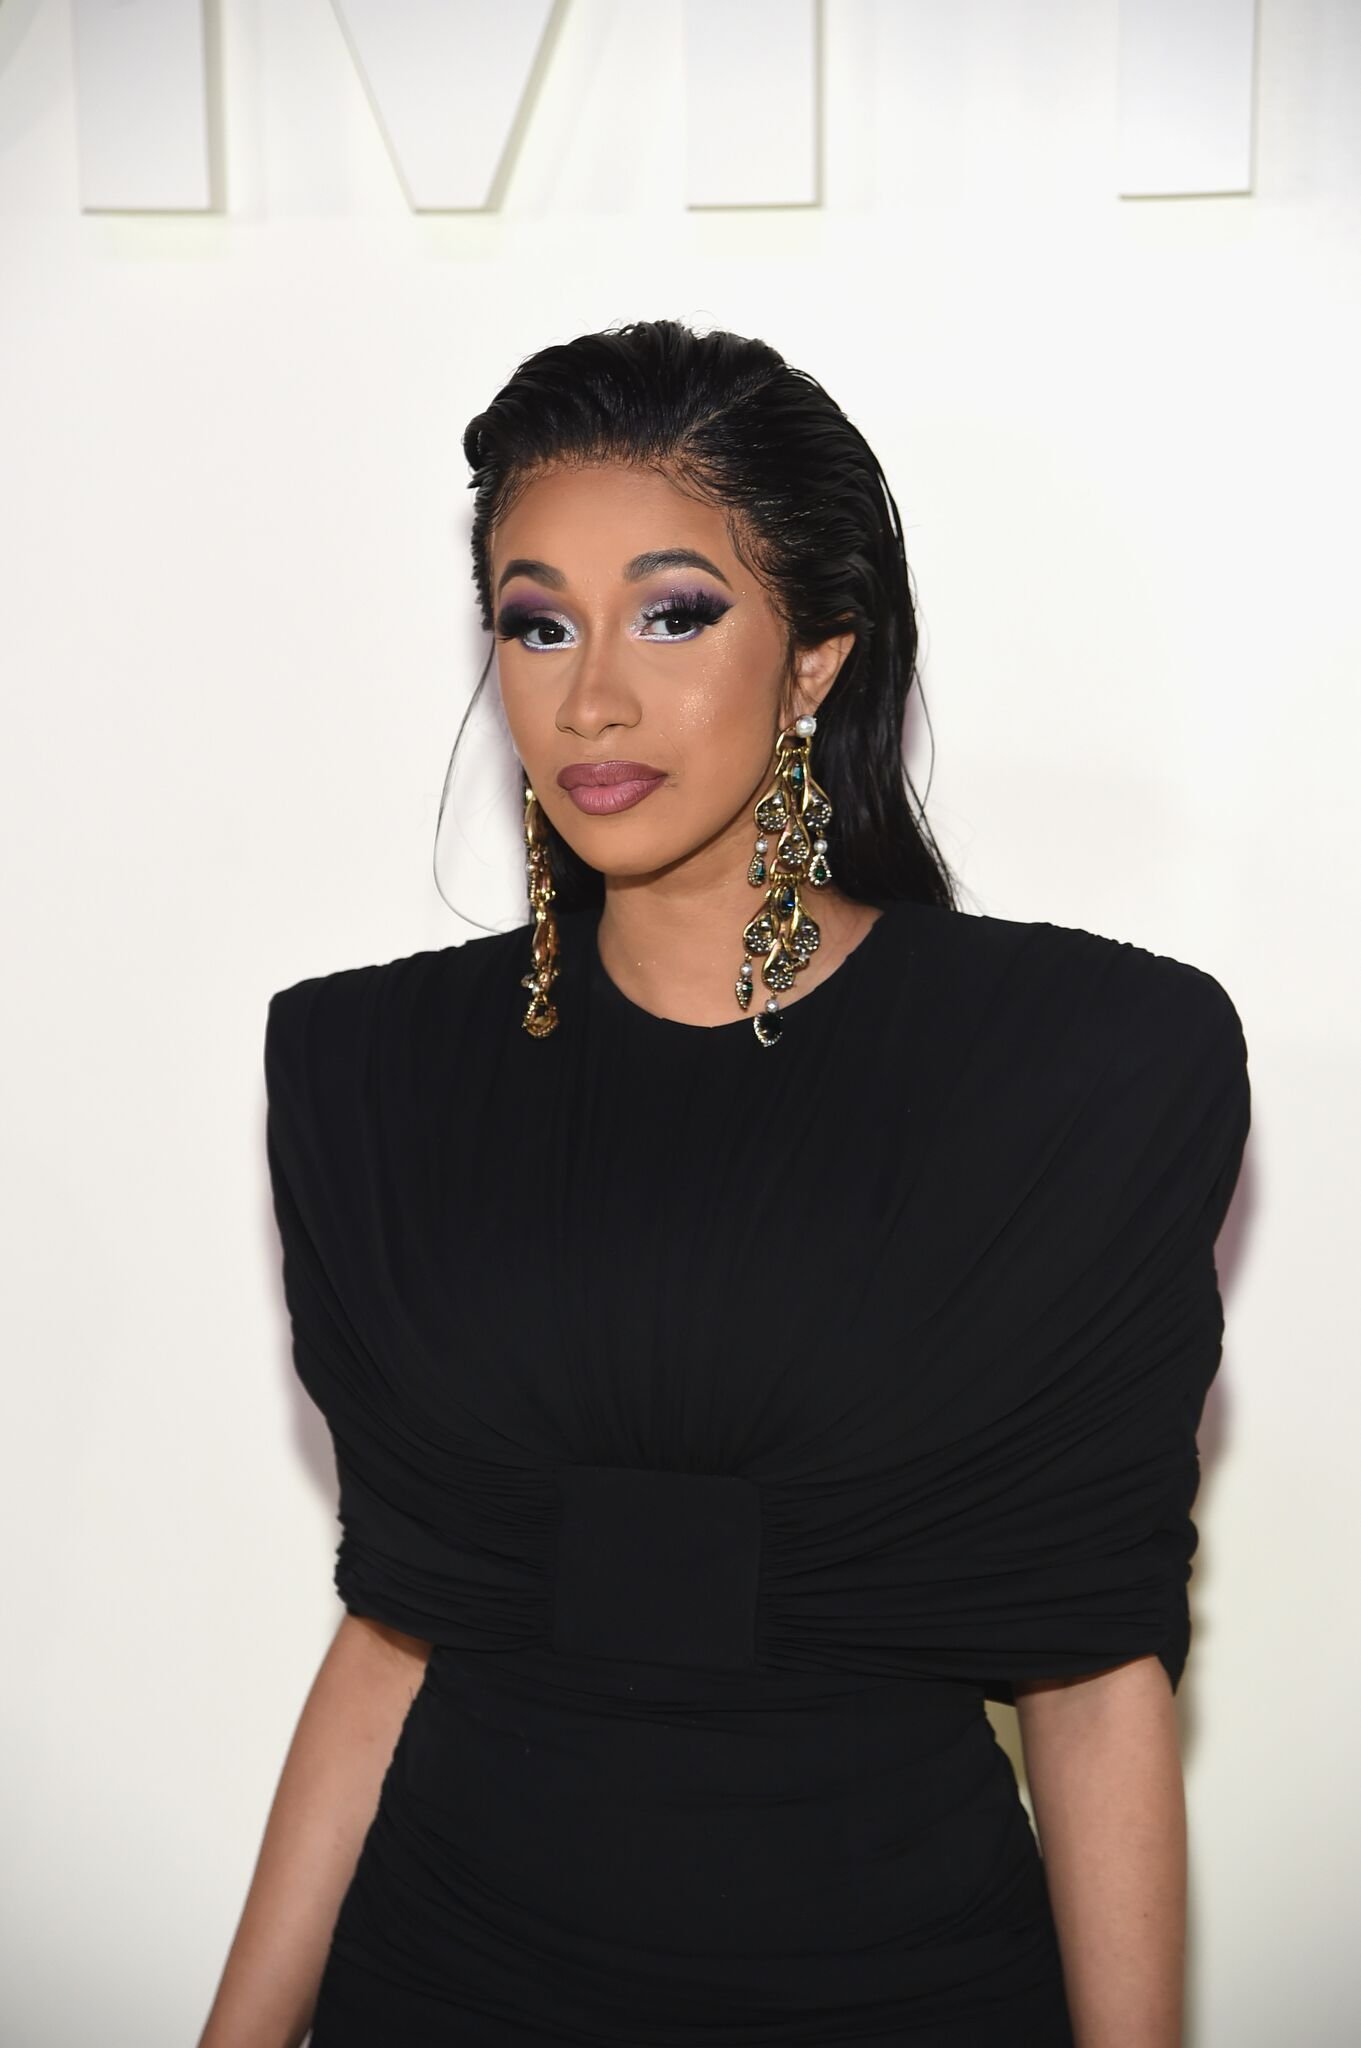  Cardi B attends the Tom Ford fashion show during New York Fashion Week at Park Avenue Armory | Getty Images